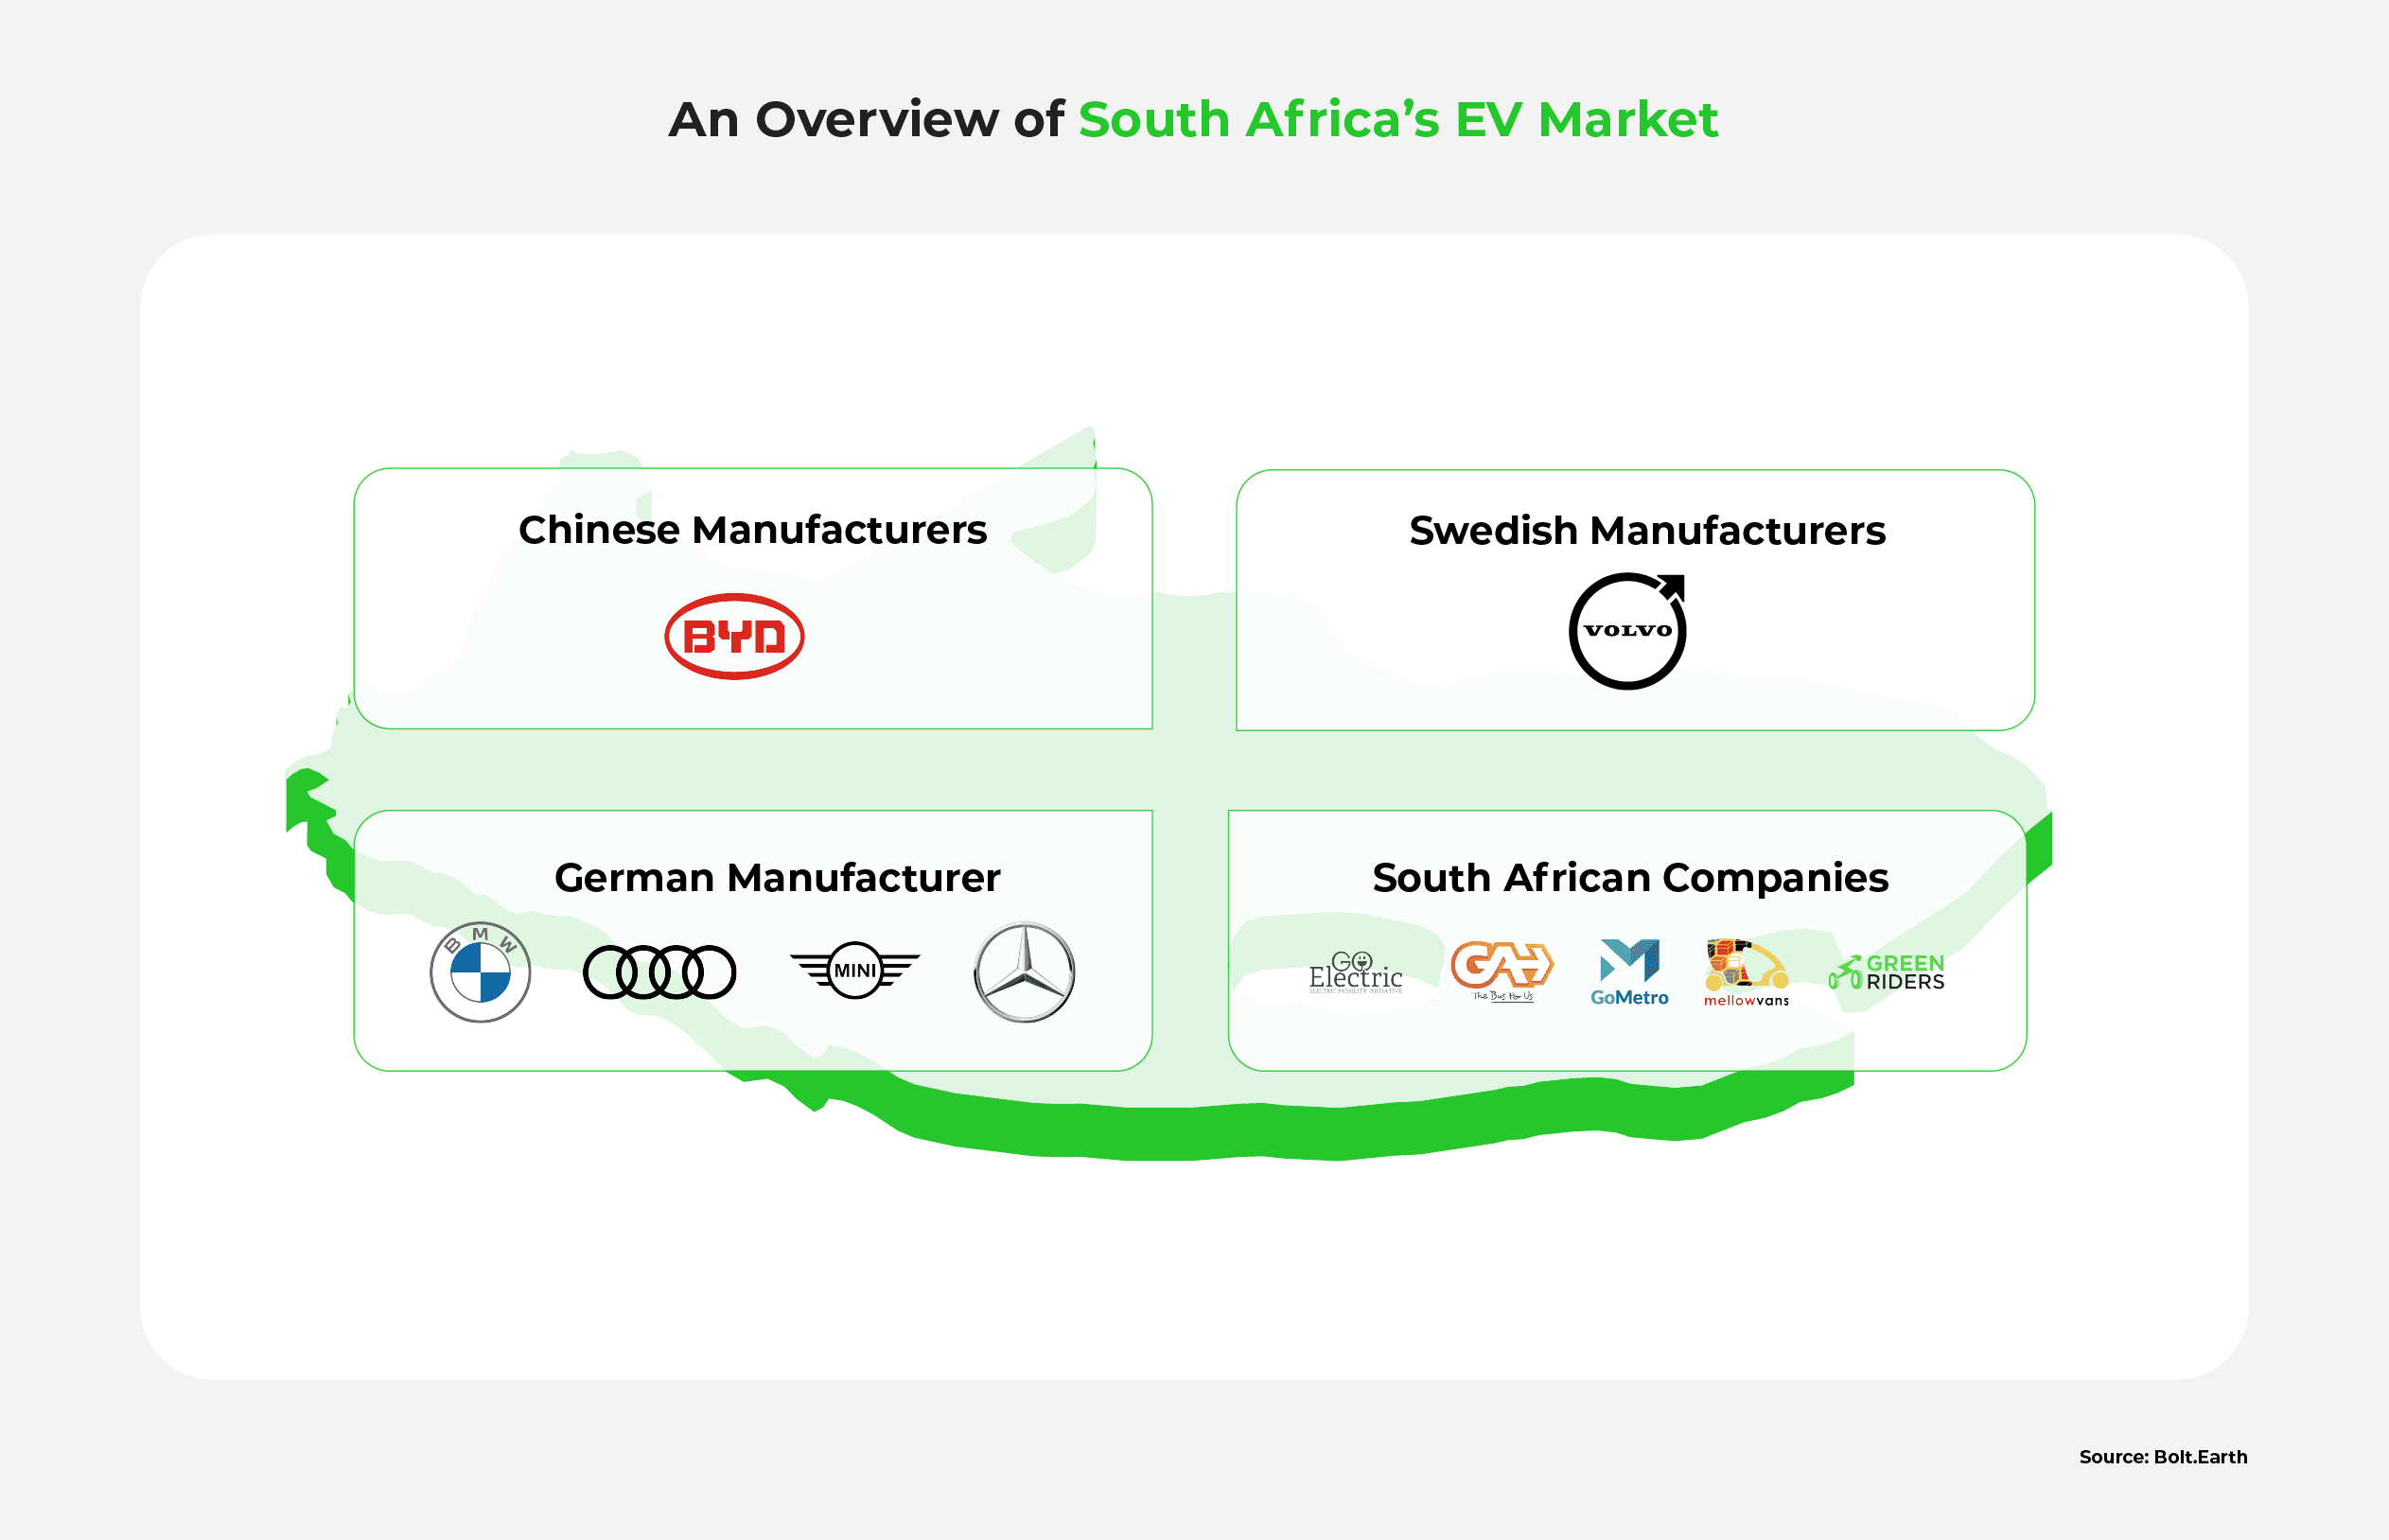 An infographic listing key players in South Africa's EV market